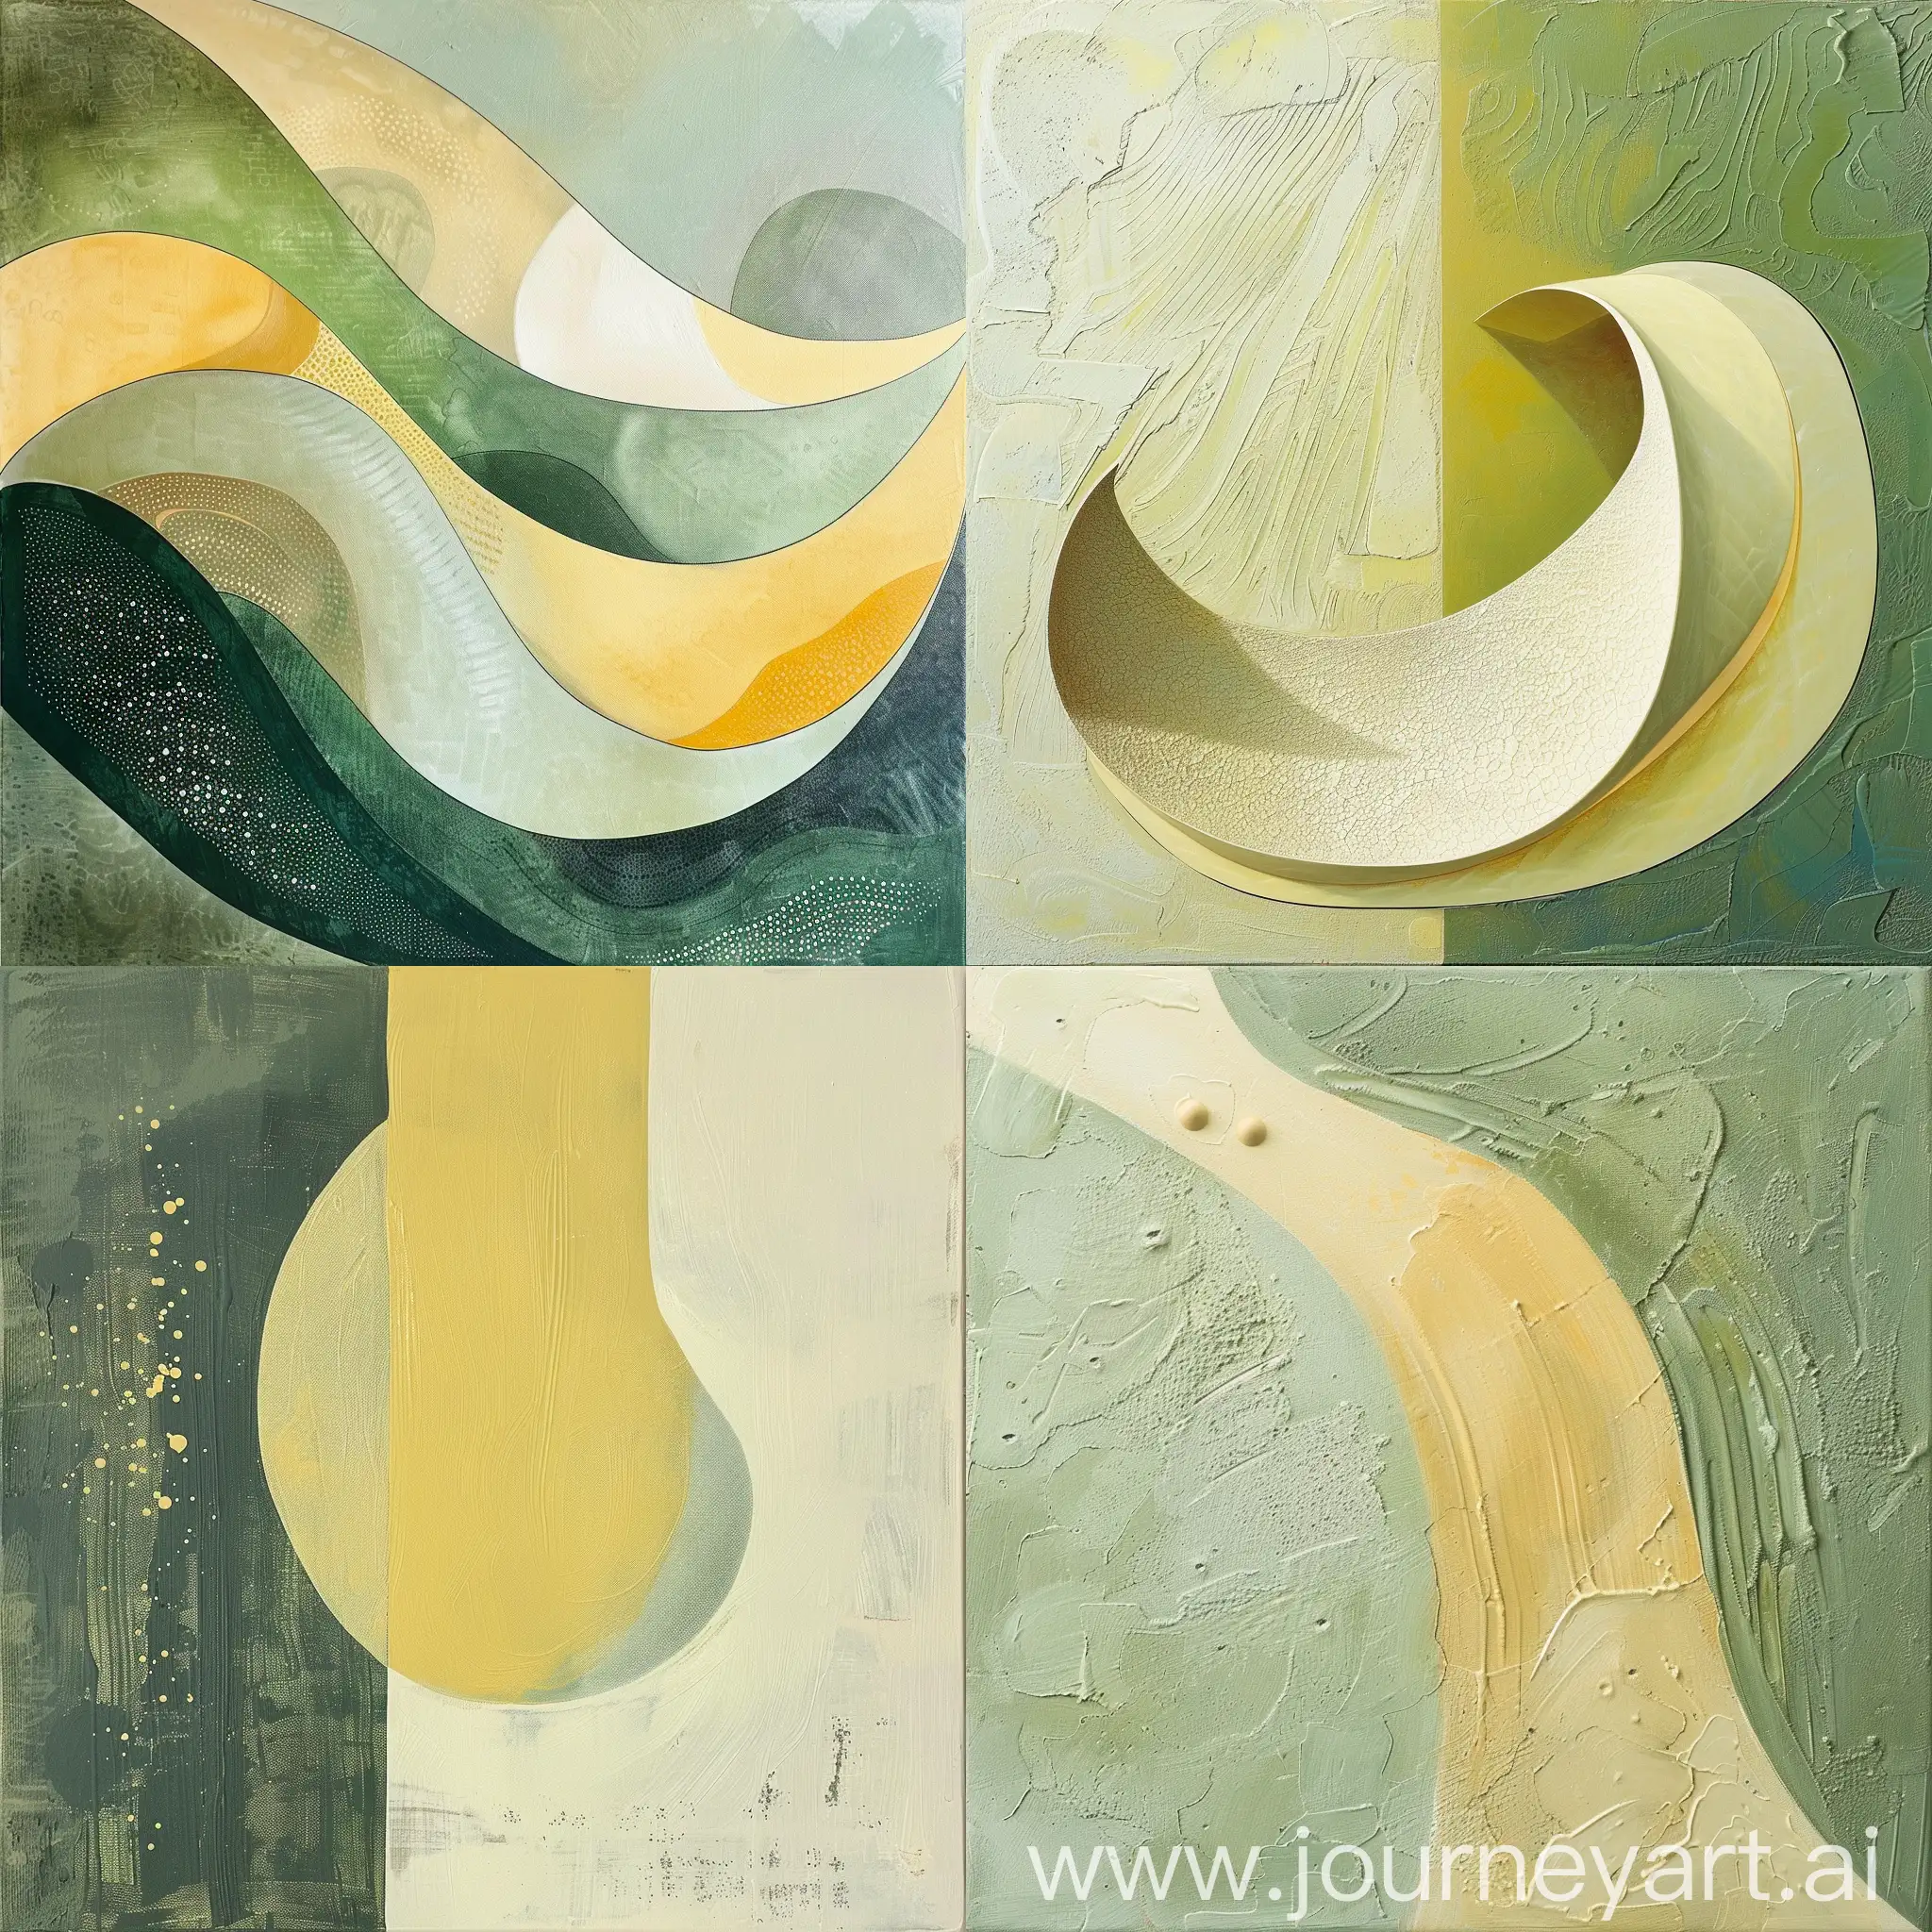 Begin by creating the shape of the image, which has a unique, organic curve, reminiscent of an abstract, fluid form. The boundaries of the form should be highlighted by a soft, white edge that gives a smooth yet defined separation from the background. The central part of the image should invoke the feeling of a textured paint palette, featuring stripes of muted green and yellow tones, providing a backdrop that resembles an artist’s wooden palette.

The texture within the image is crucial and should be emphasized effectively. The painting technique looks thick and layered, with visible brushstrokes that give a three-dimensional appearance. The yellow stripe across the centre should have a creamy, butter-like texture, swept across with a palette knife that leaves heavy, uneven marks. Adjacent to this, the green areas should be depicted with more uniform, lighter brushstrokes, adding contrast in both colour and texture.

Inclusion of small details will enrich the final output. Specifically, the circular, textured dots in pale yellow, lightly raised, add an interesting visual element that must be included. They appear to cast subtle shadows, suggesting that they are slightly elevated from the surface, enhancing the textured effect. To improve the viewing experience, playing with lighting could be considered, such as imagining a soft light source that enhances the shadows and highlights, increasing the depth and the lifelike quality of the image.